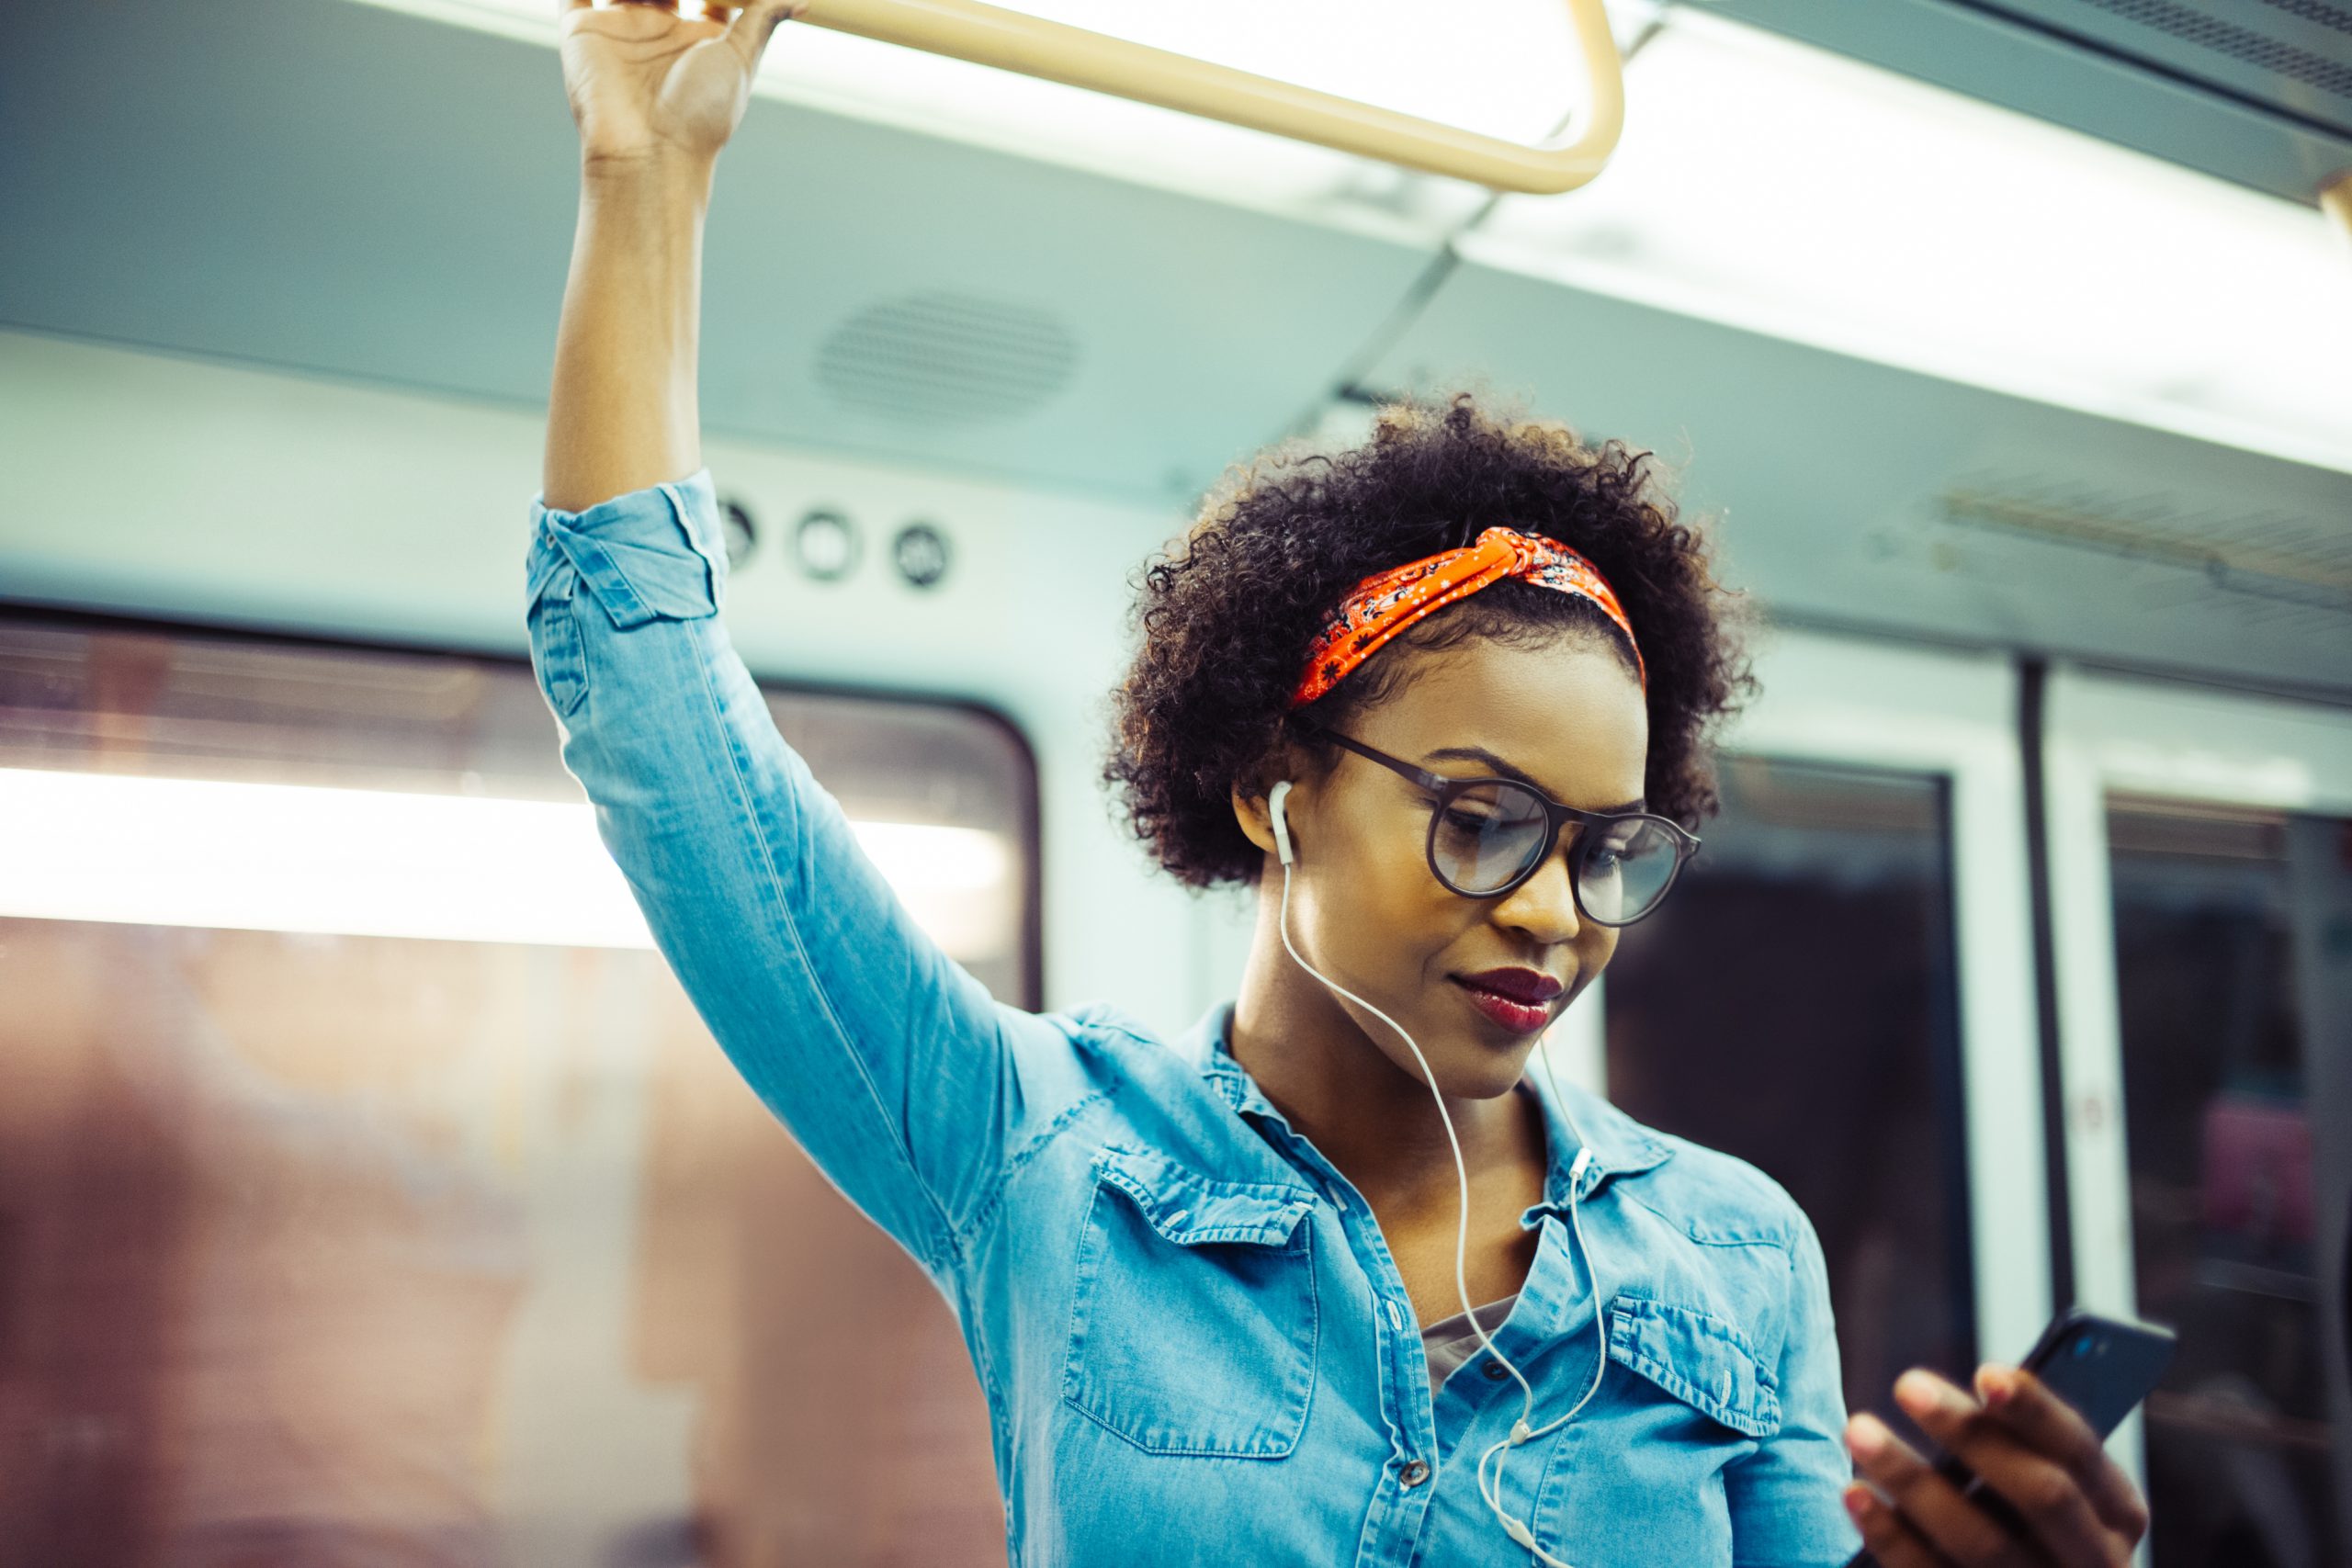 A young woman with headphones, listening to music on her phone on the train